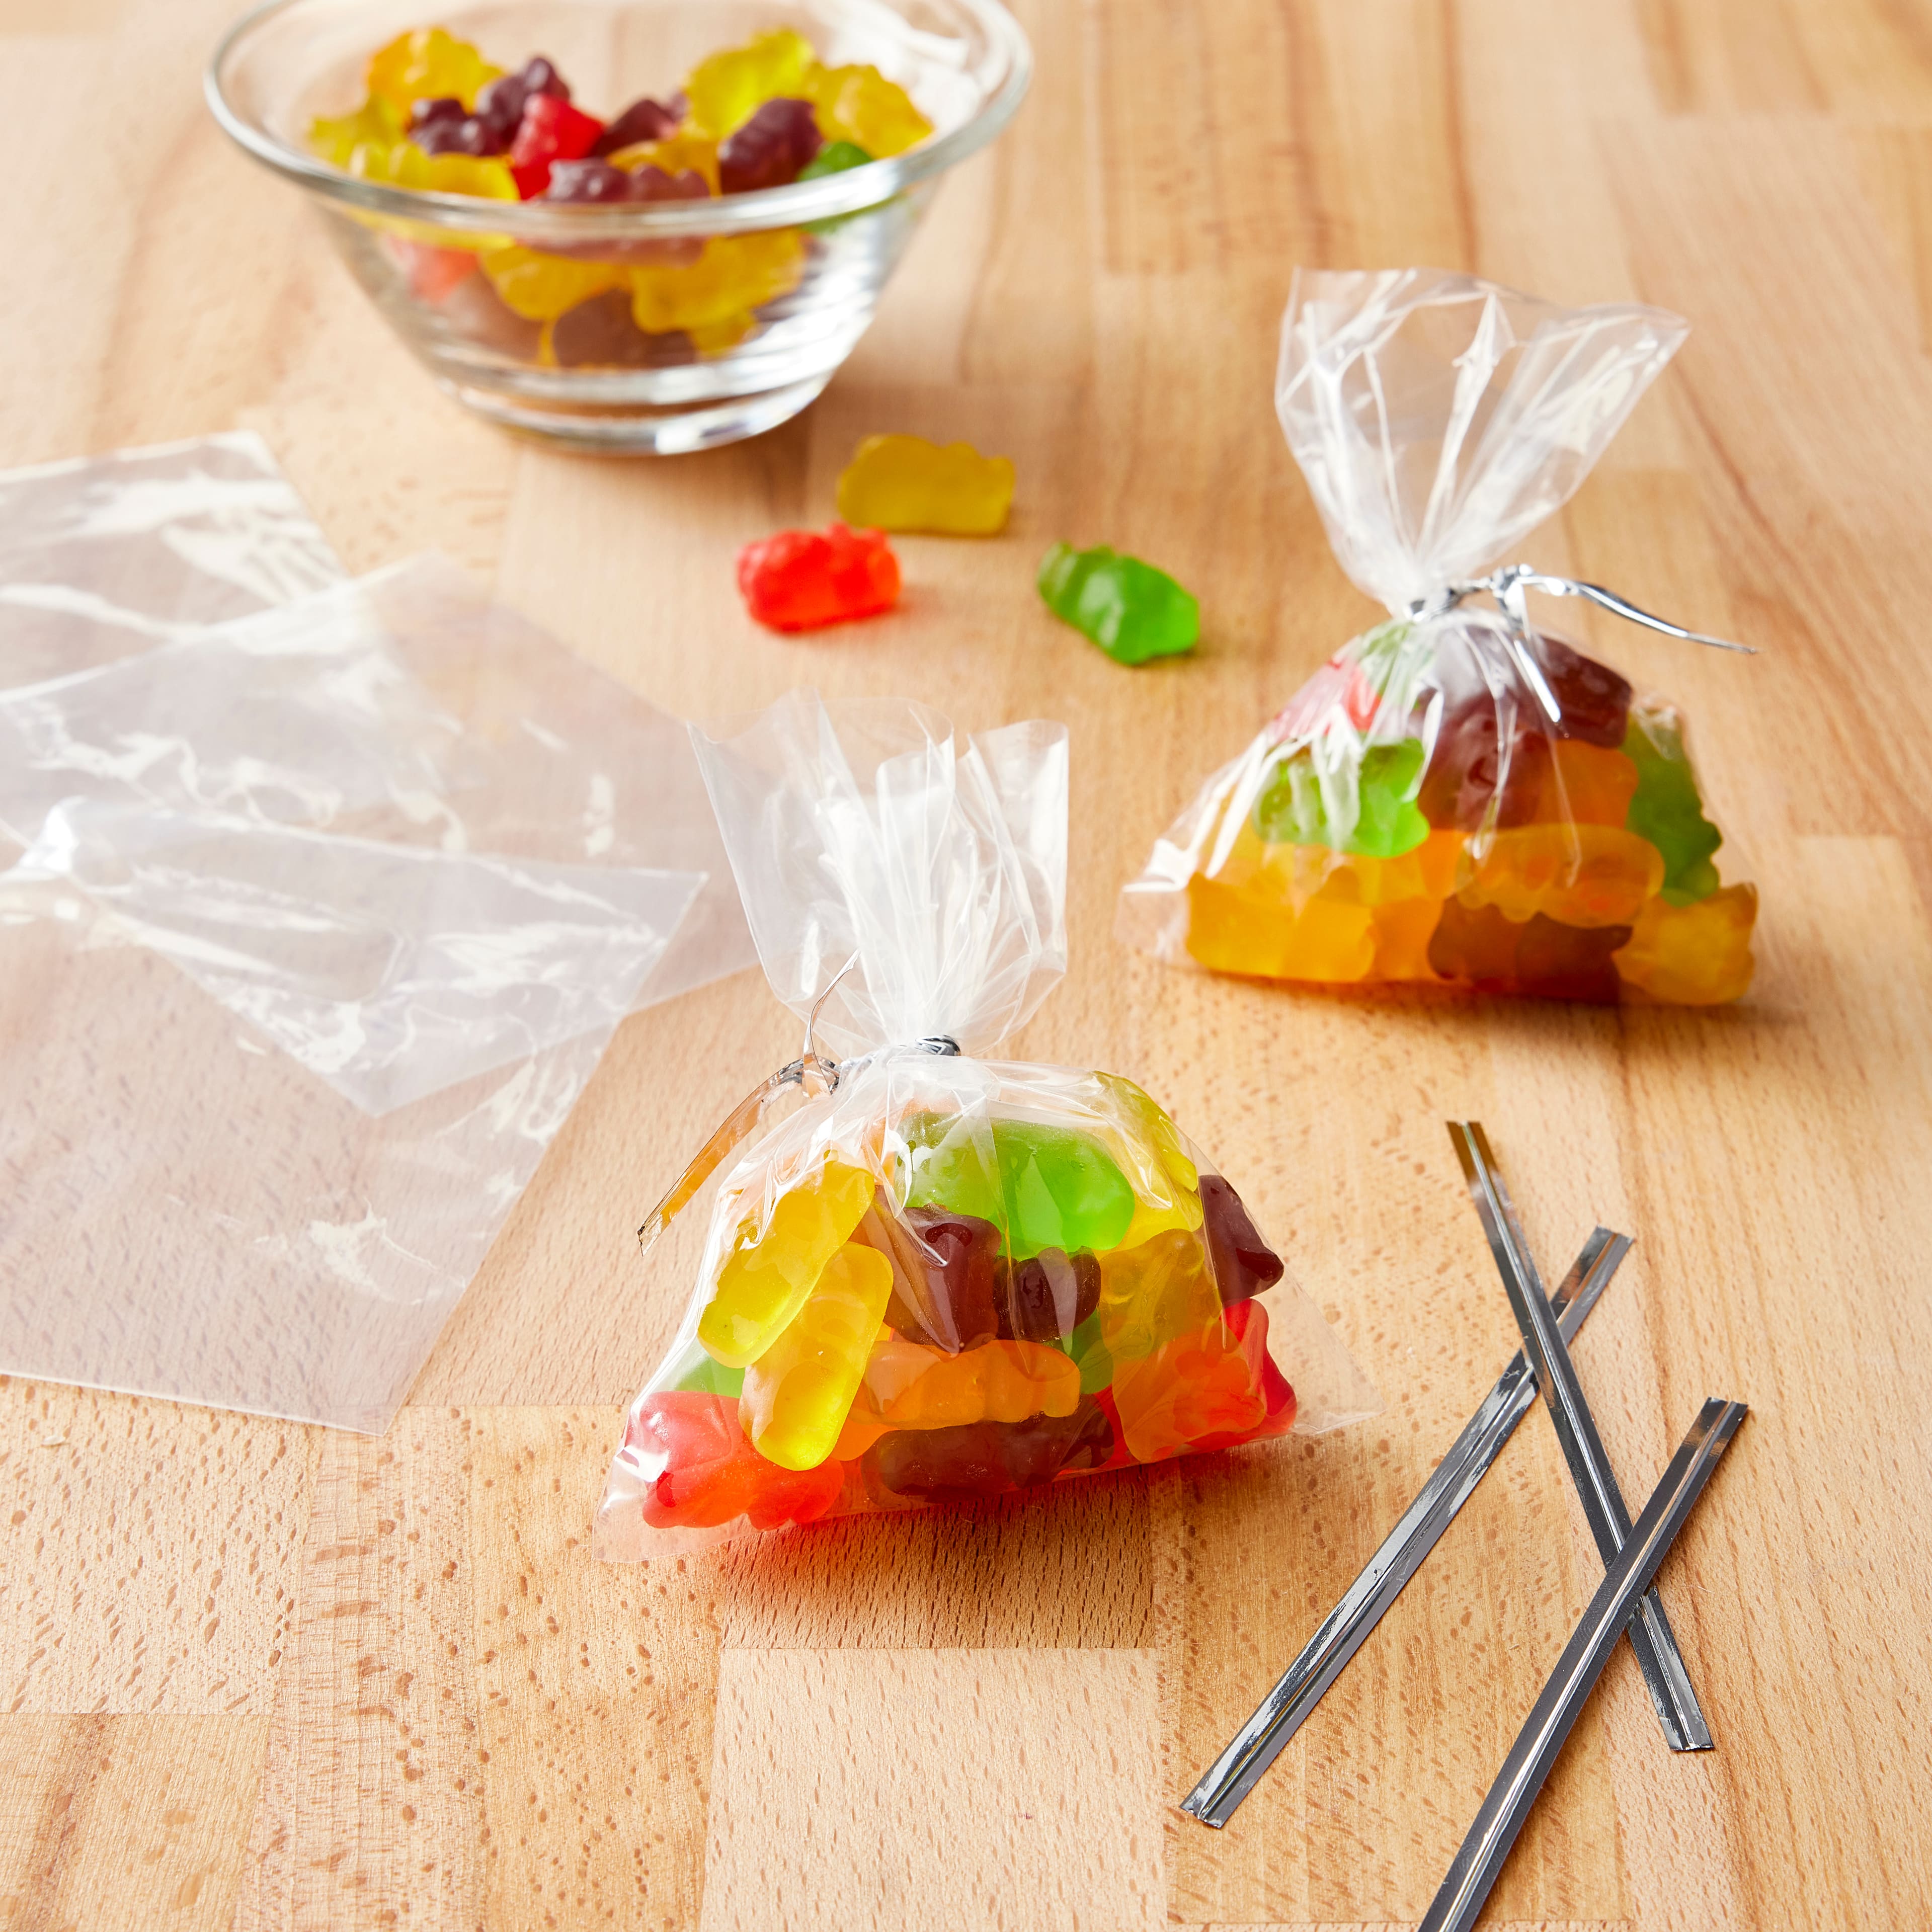 4&#x22; Clear Rectangle Treat Bags by Celebrate It&#xAE;, 100ct.